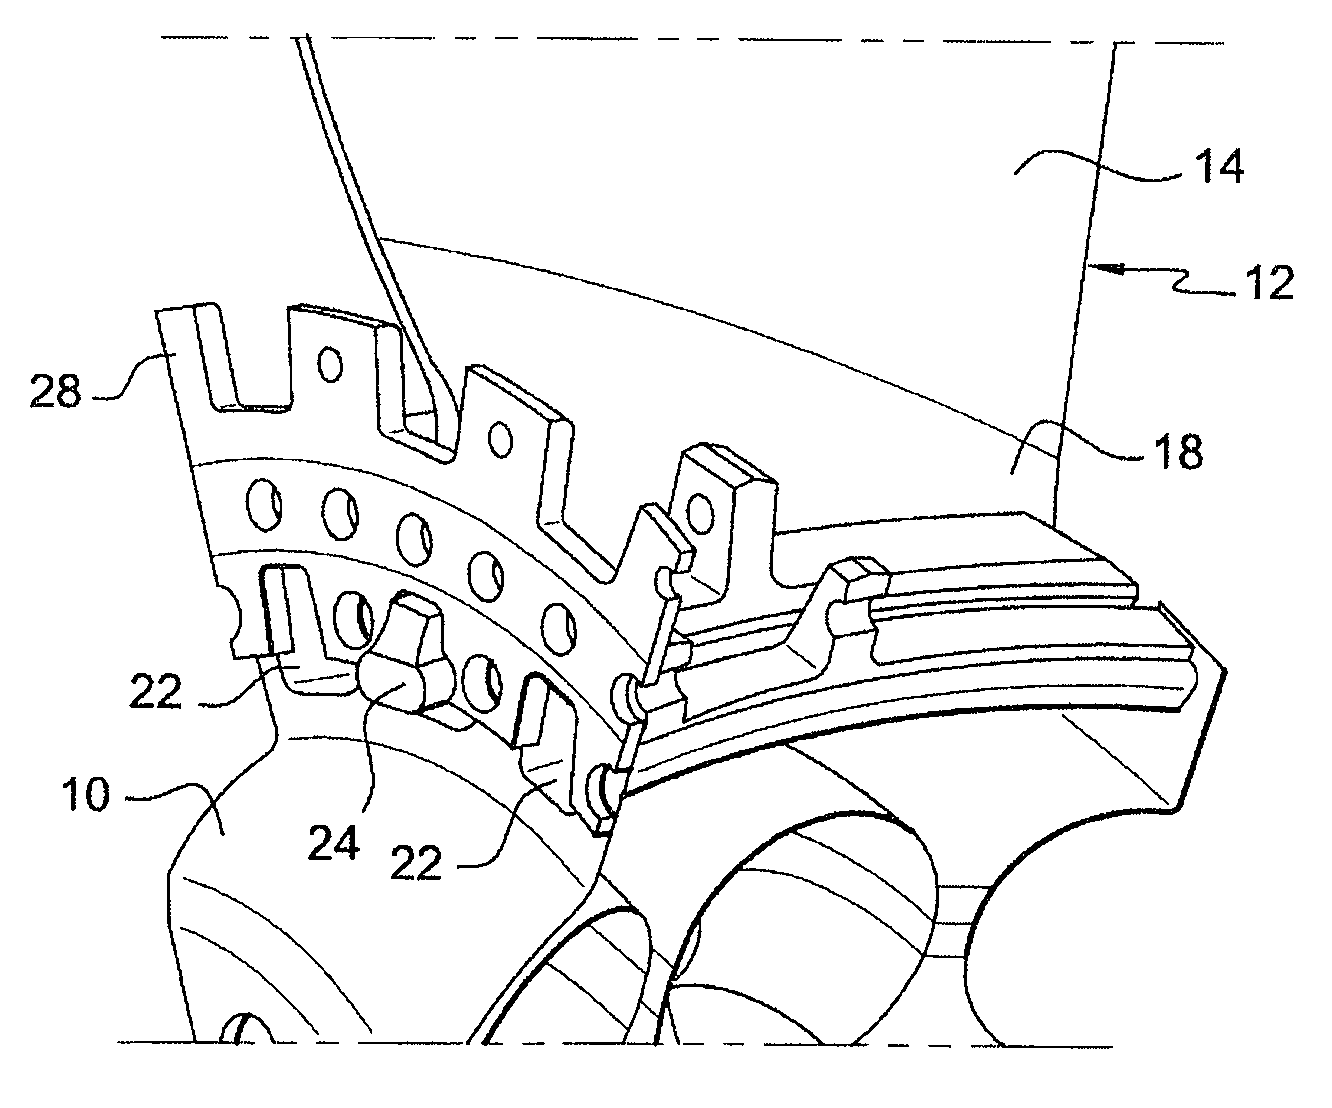 Rotor disk for turbomachine fan